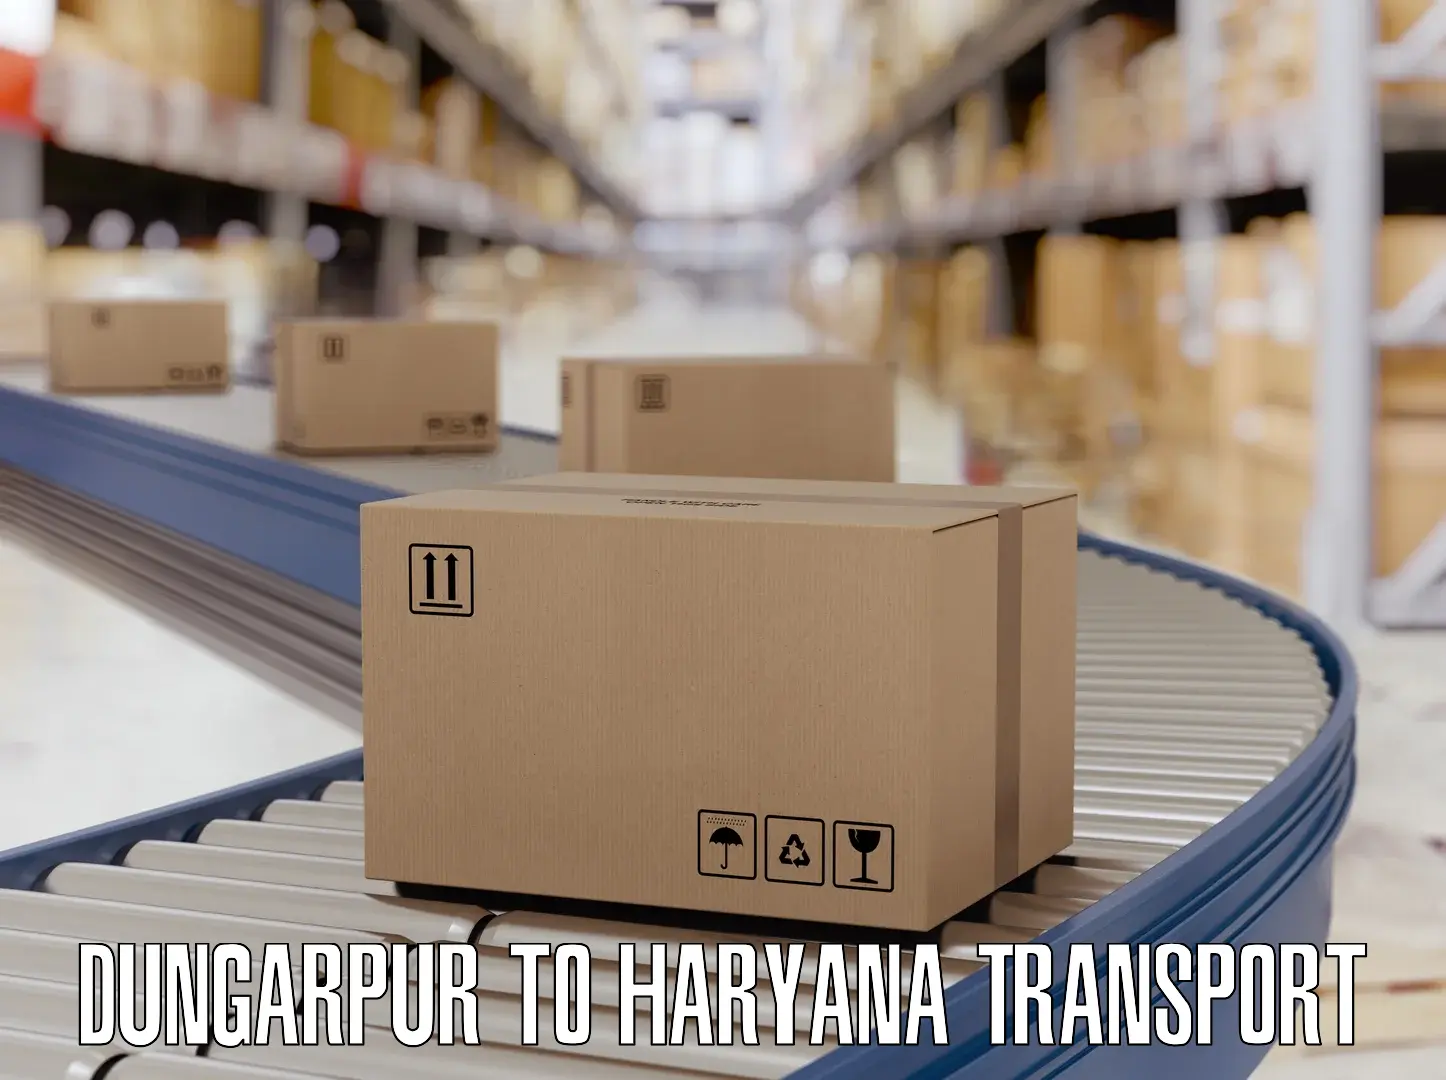 Daily parcel service transport Dungarpur to Faridabad